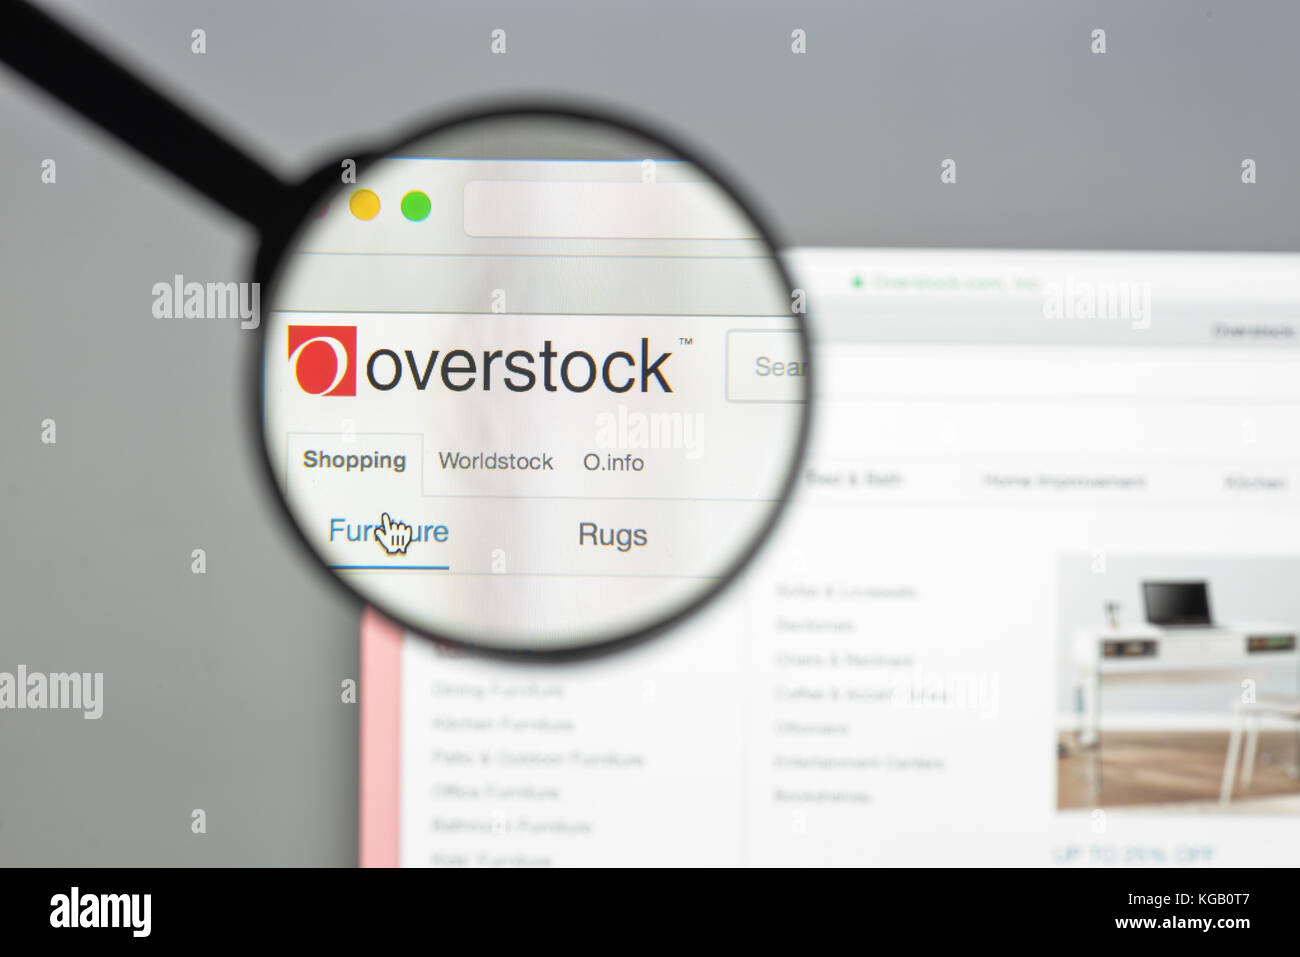 Milan, Italy - August 10, 2017: Overstock website homepage. It is an American internet retailer. Overstock logo visible. Stock Photo